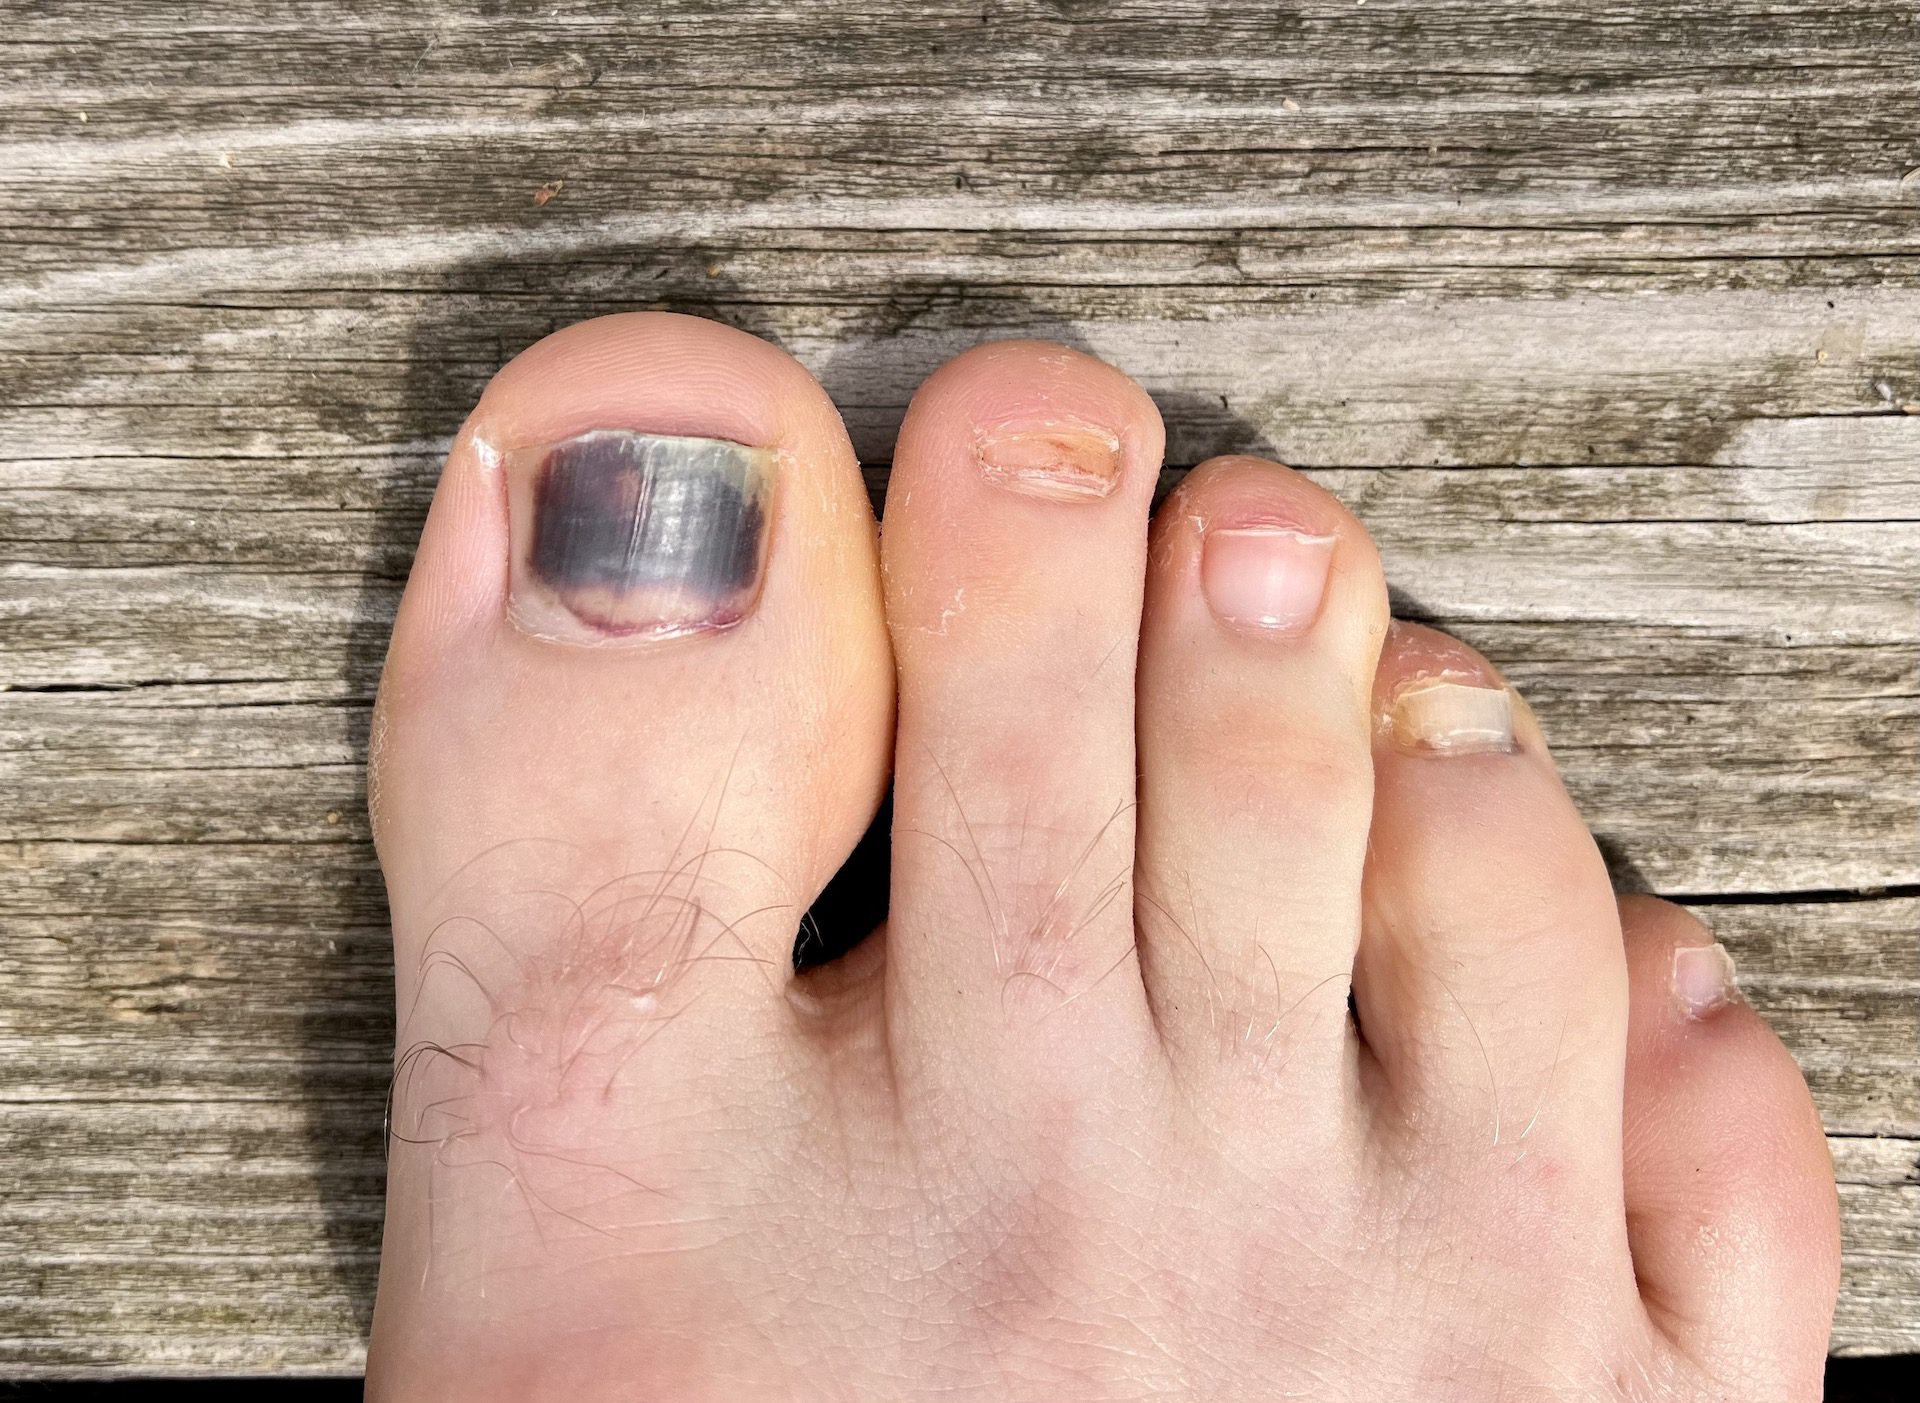 My Dog Has an Infected Toenail: What to Do? - Volhard Dog Nutrition